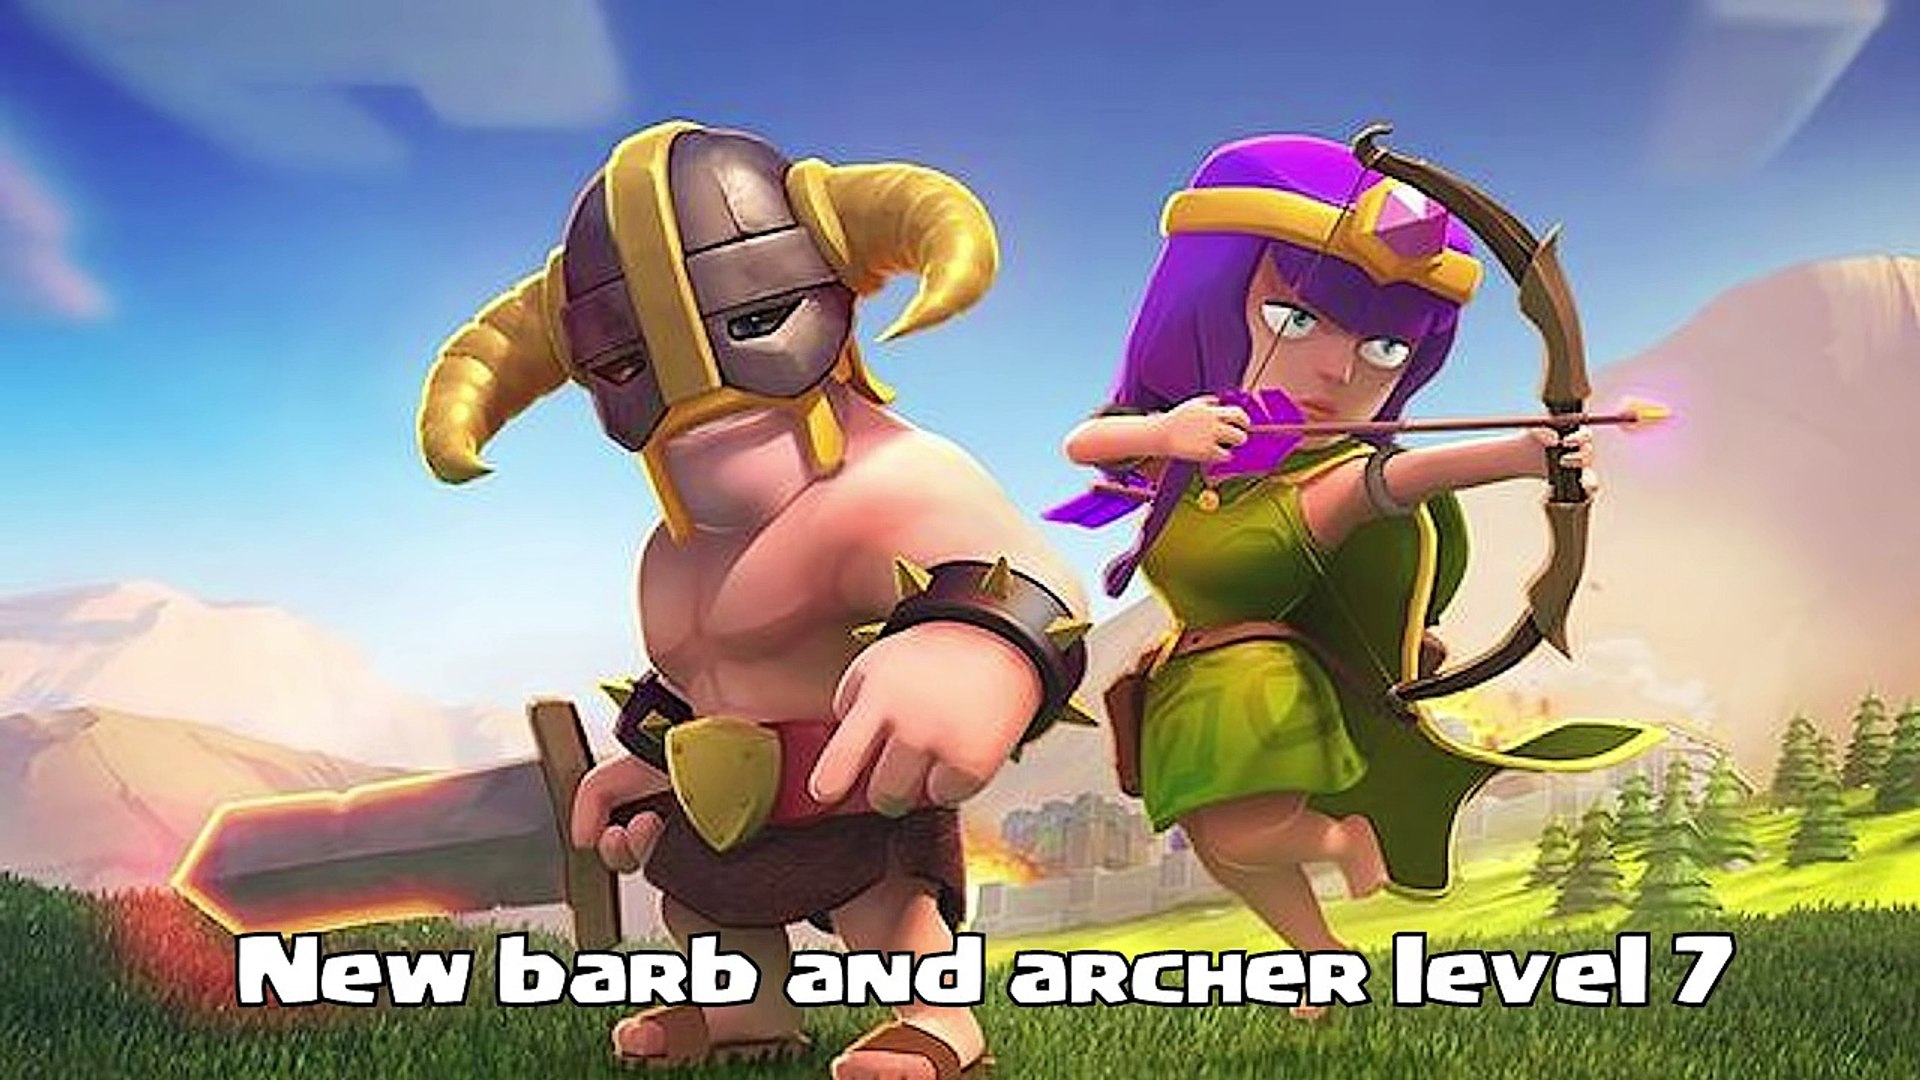 Clash Of Clans Barbarian Level 8 Archer Level 7 Upgrades.